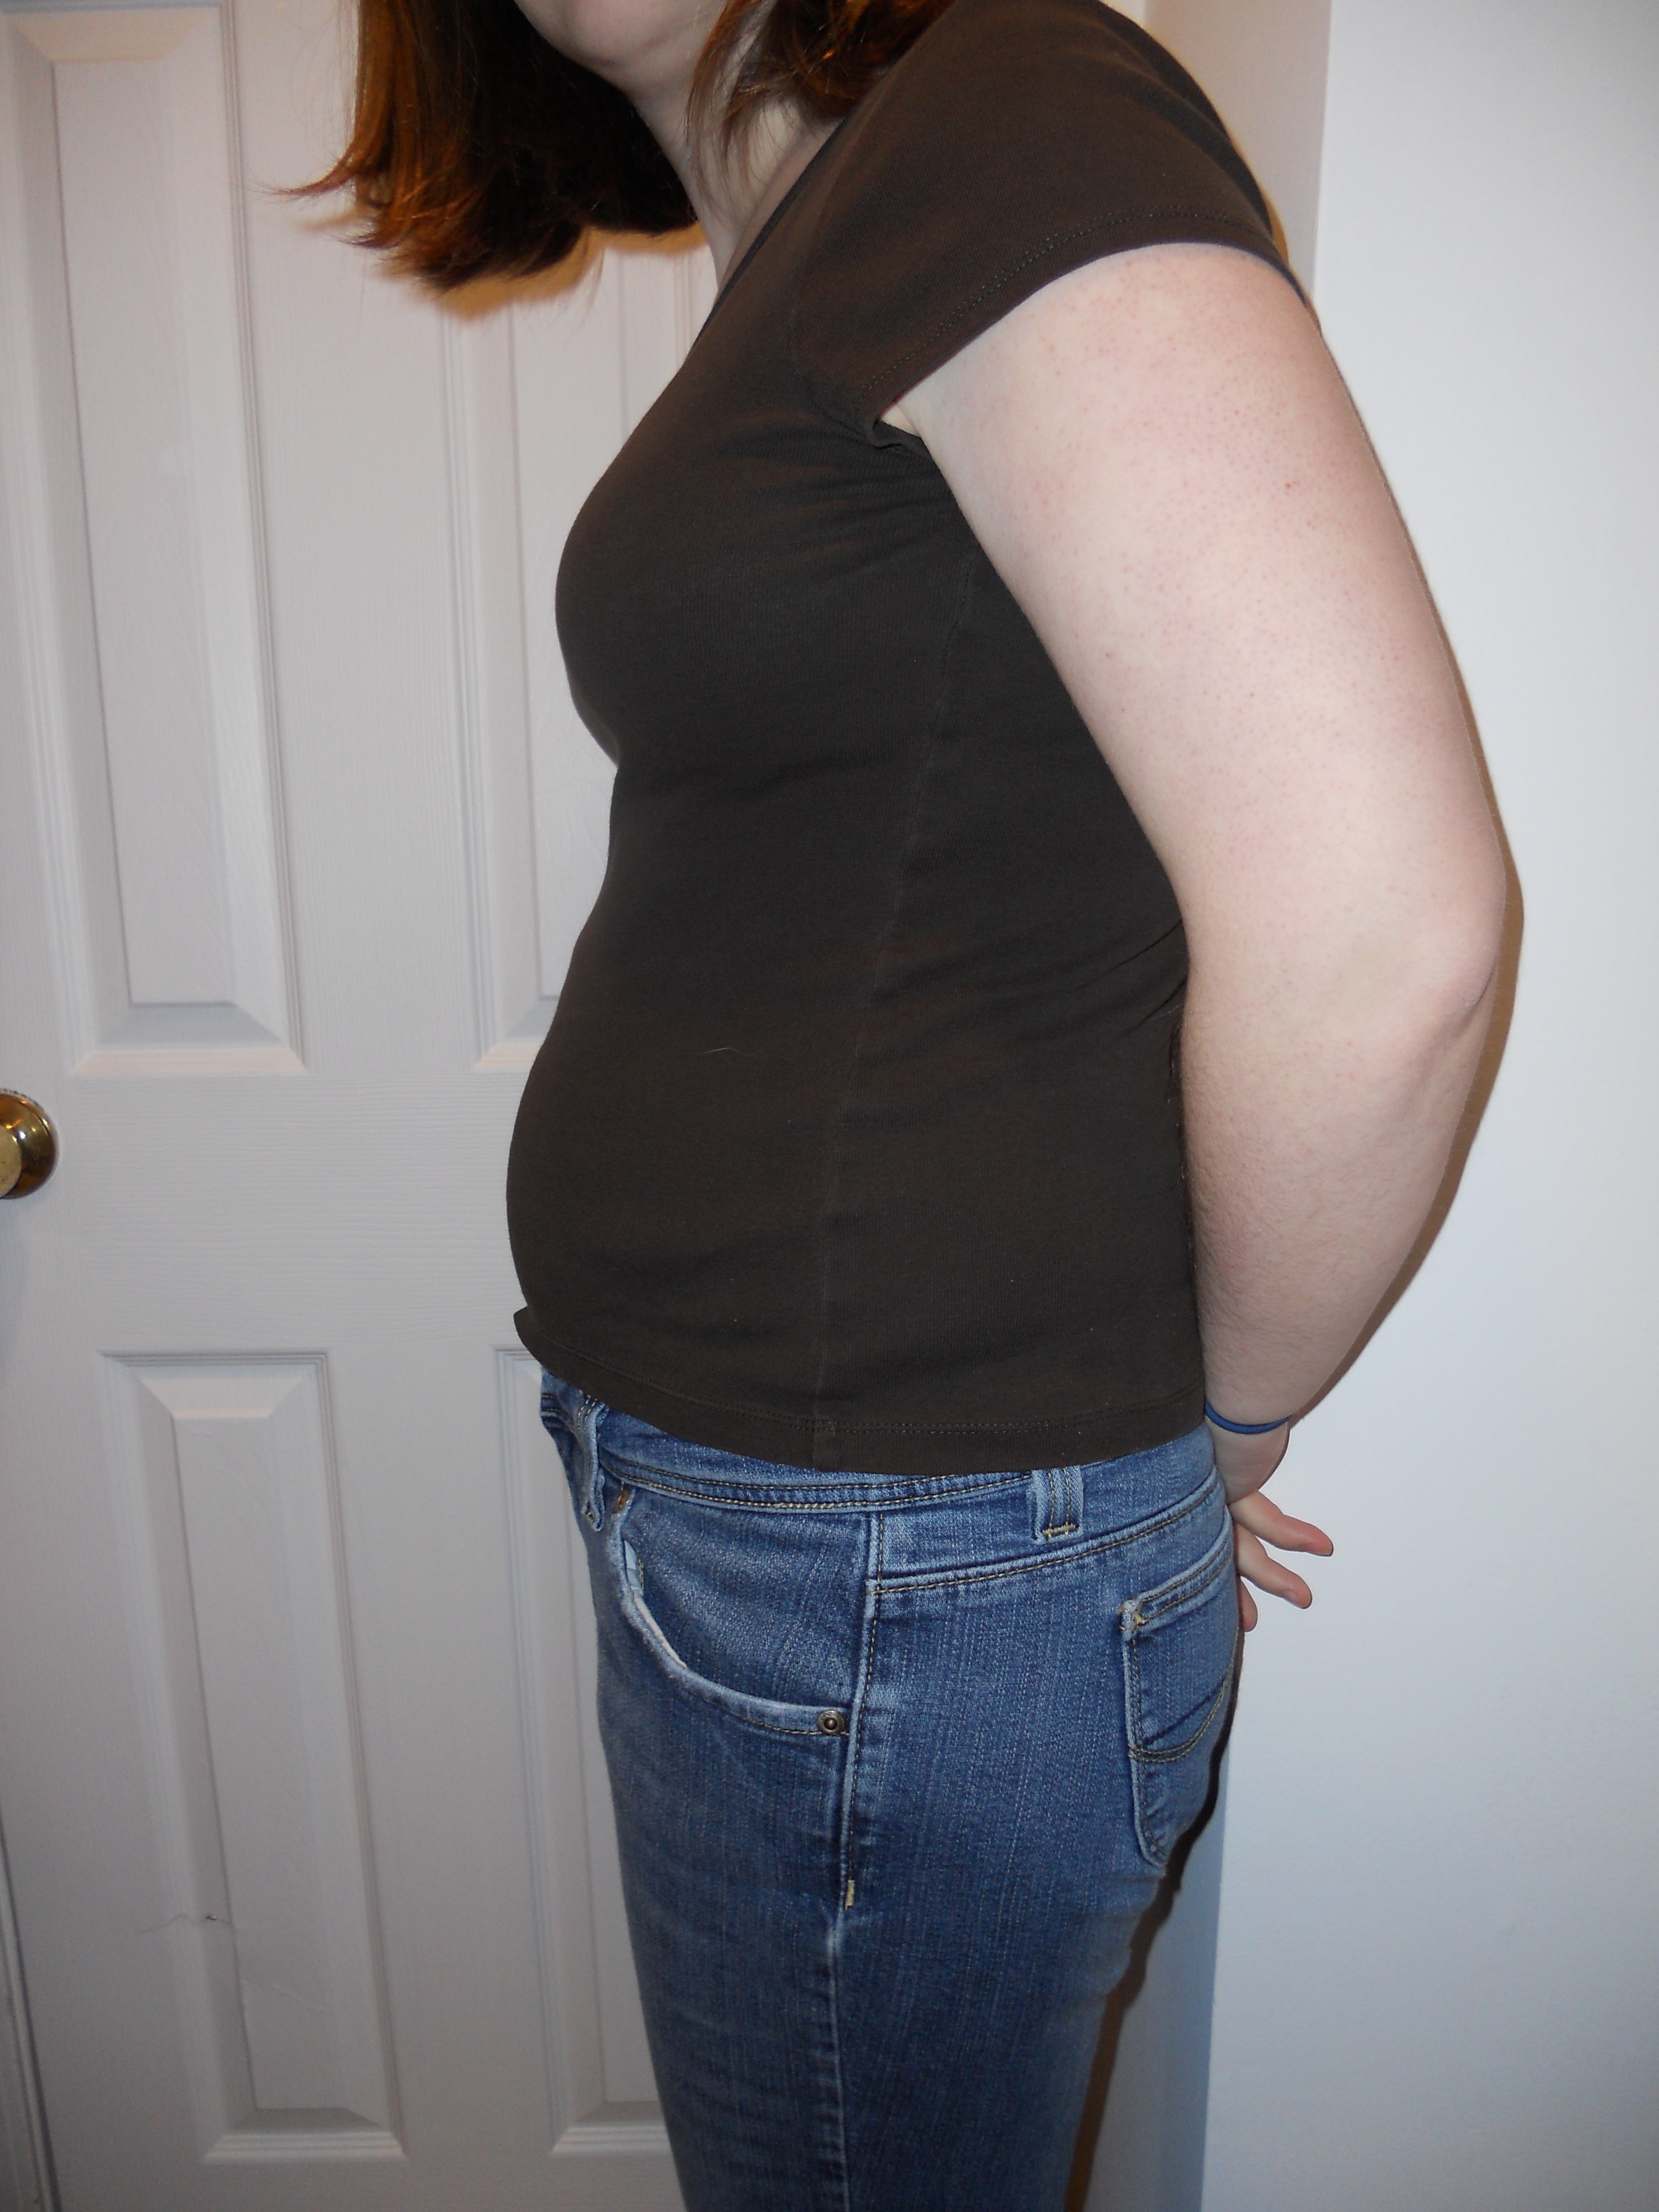 12 Weeks Pregnant With Triplets